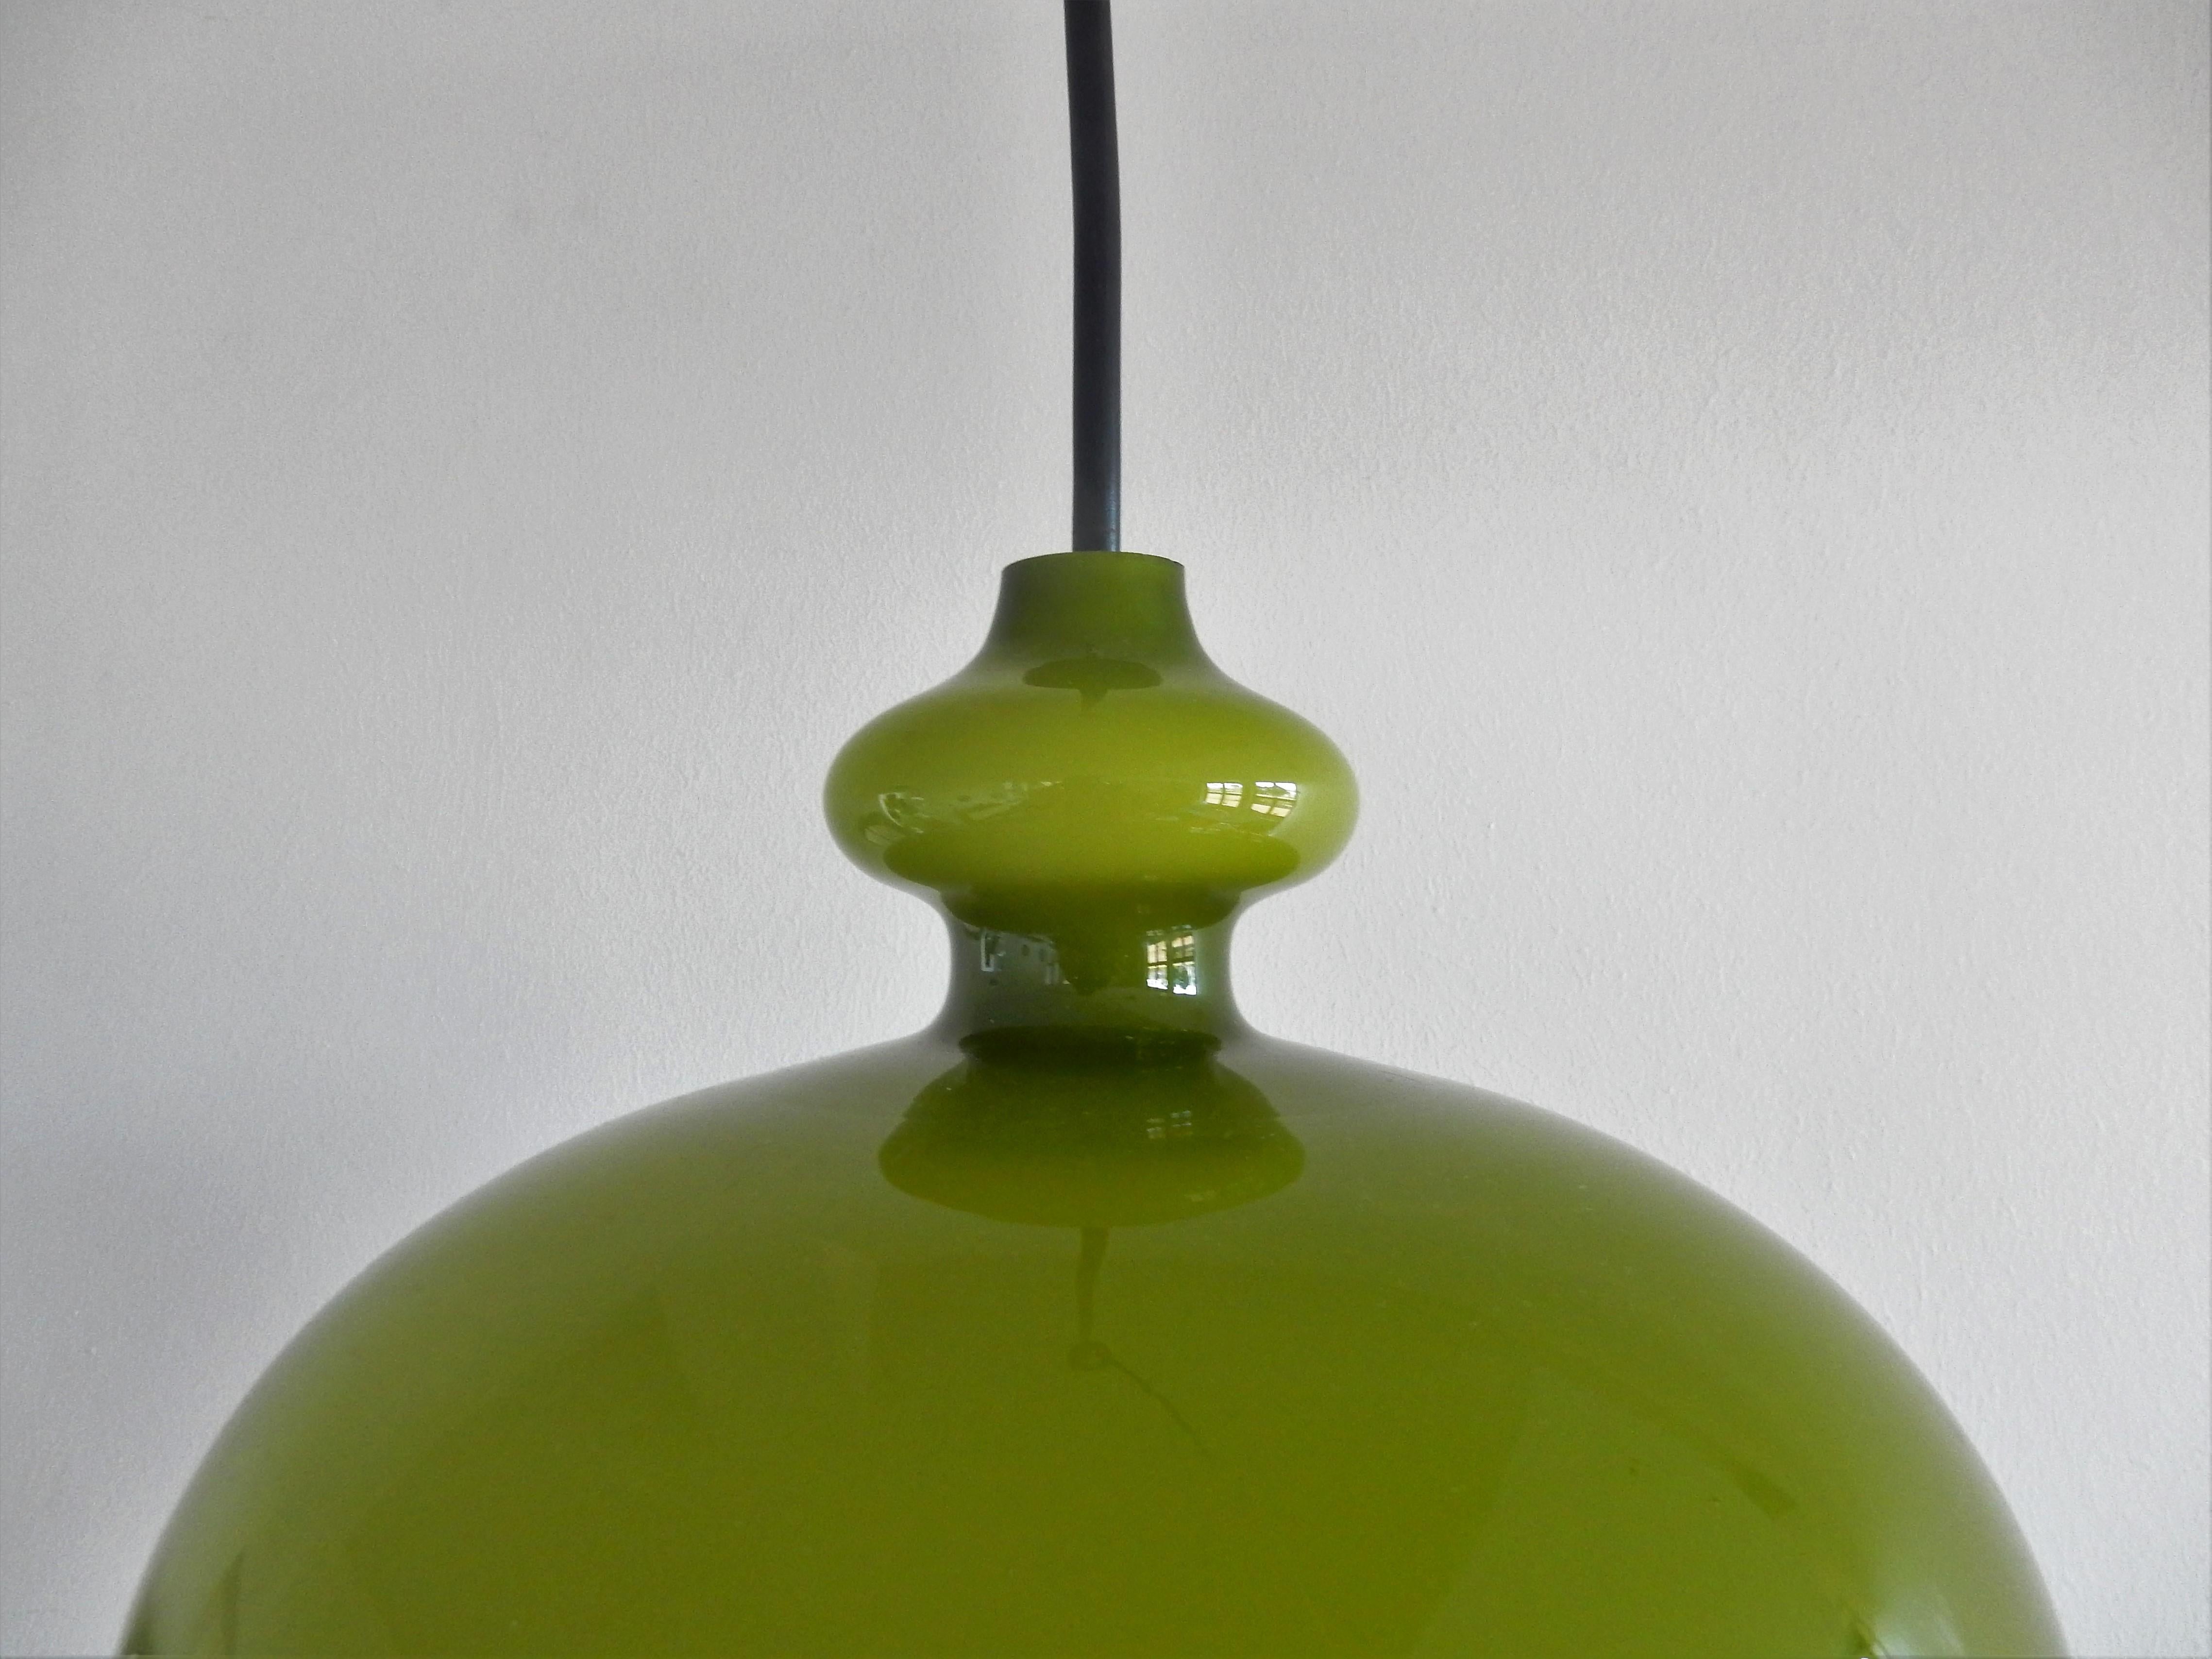 This beautiful round shaped glass pendant lamp was designed by Hans-Agne Jakobsson for Svera in the 1960s. It has a warm green colored glass shade with an opaline inside for a beautiful softened light. This lamp is in a very good condition with